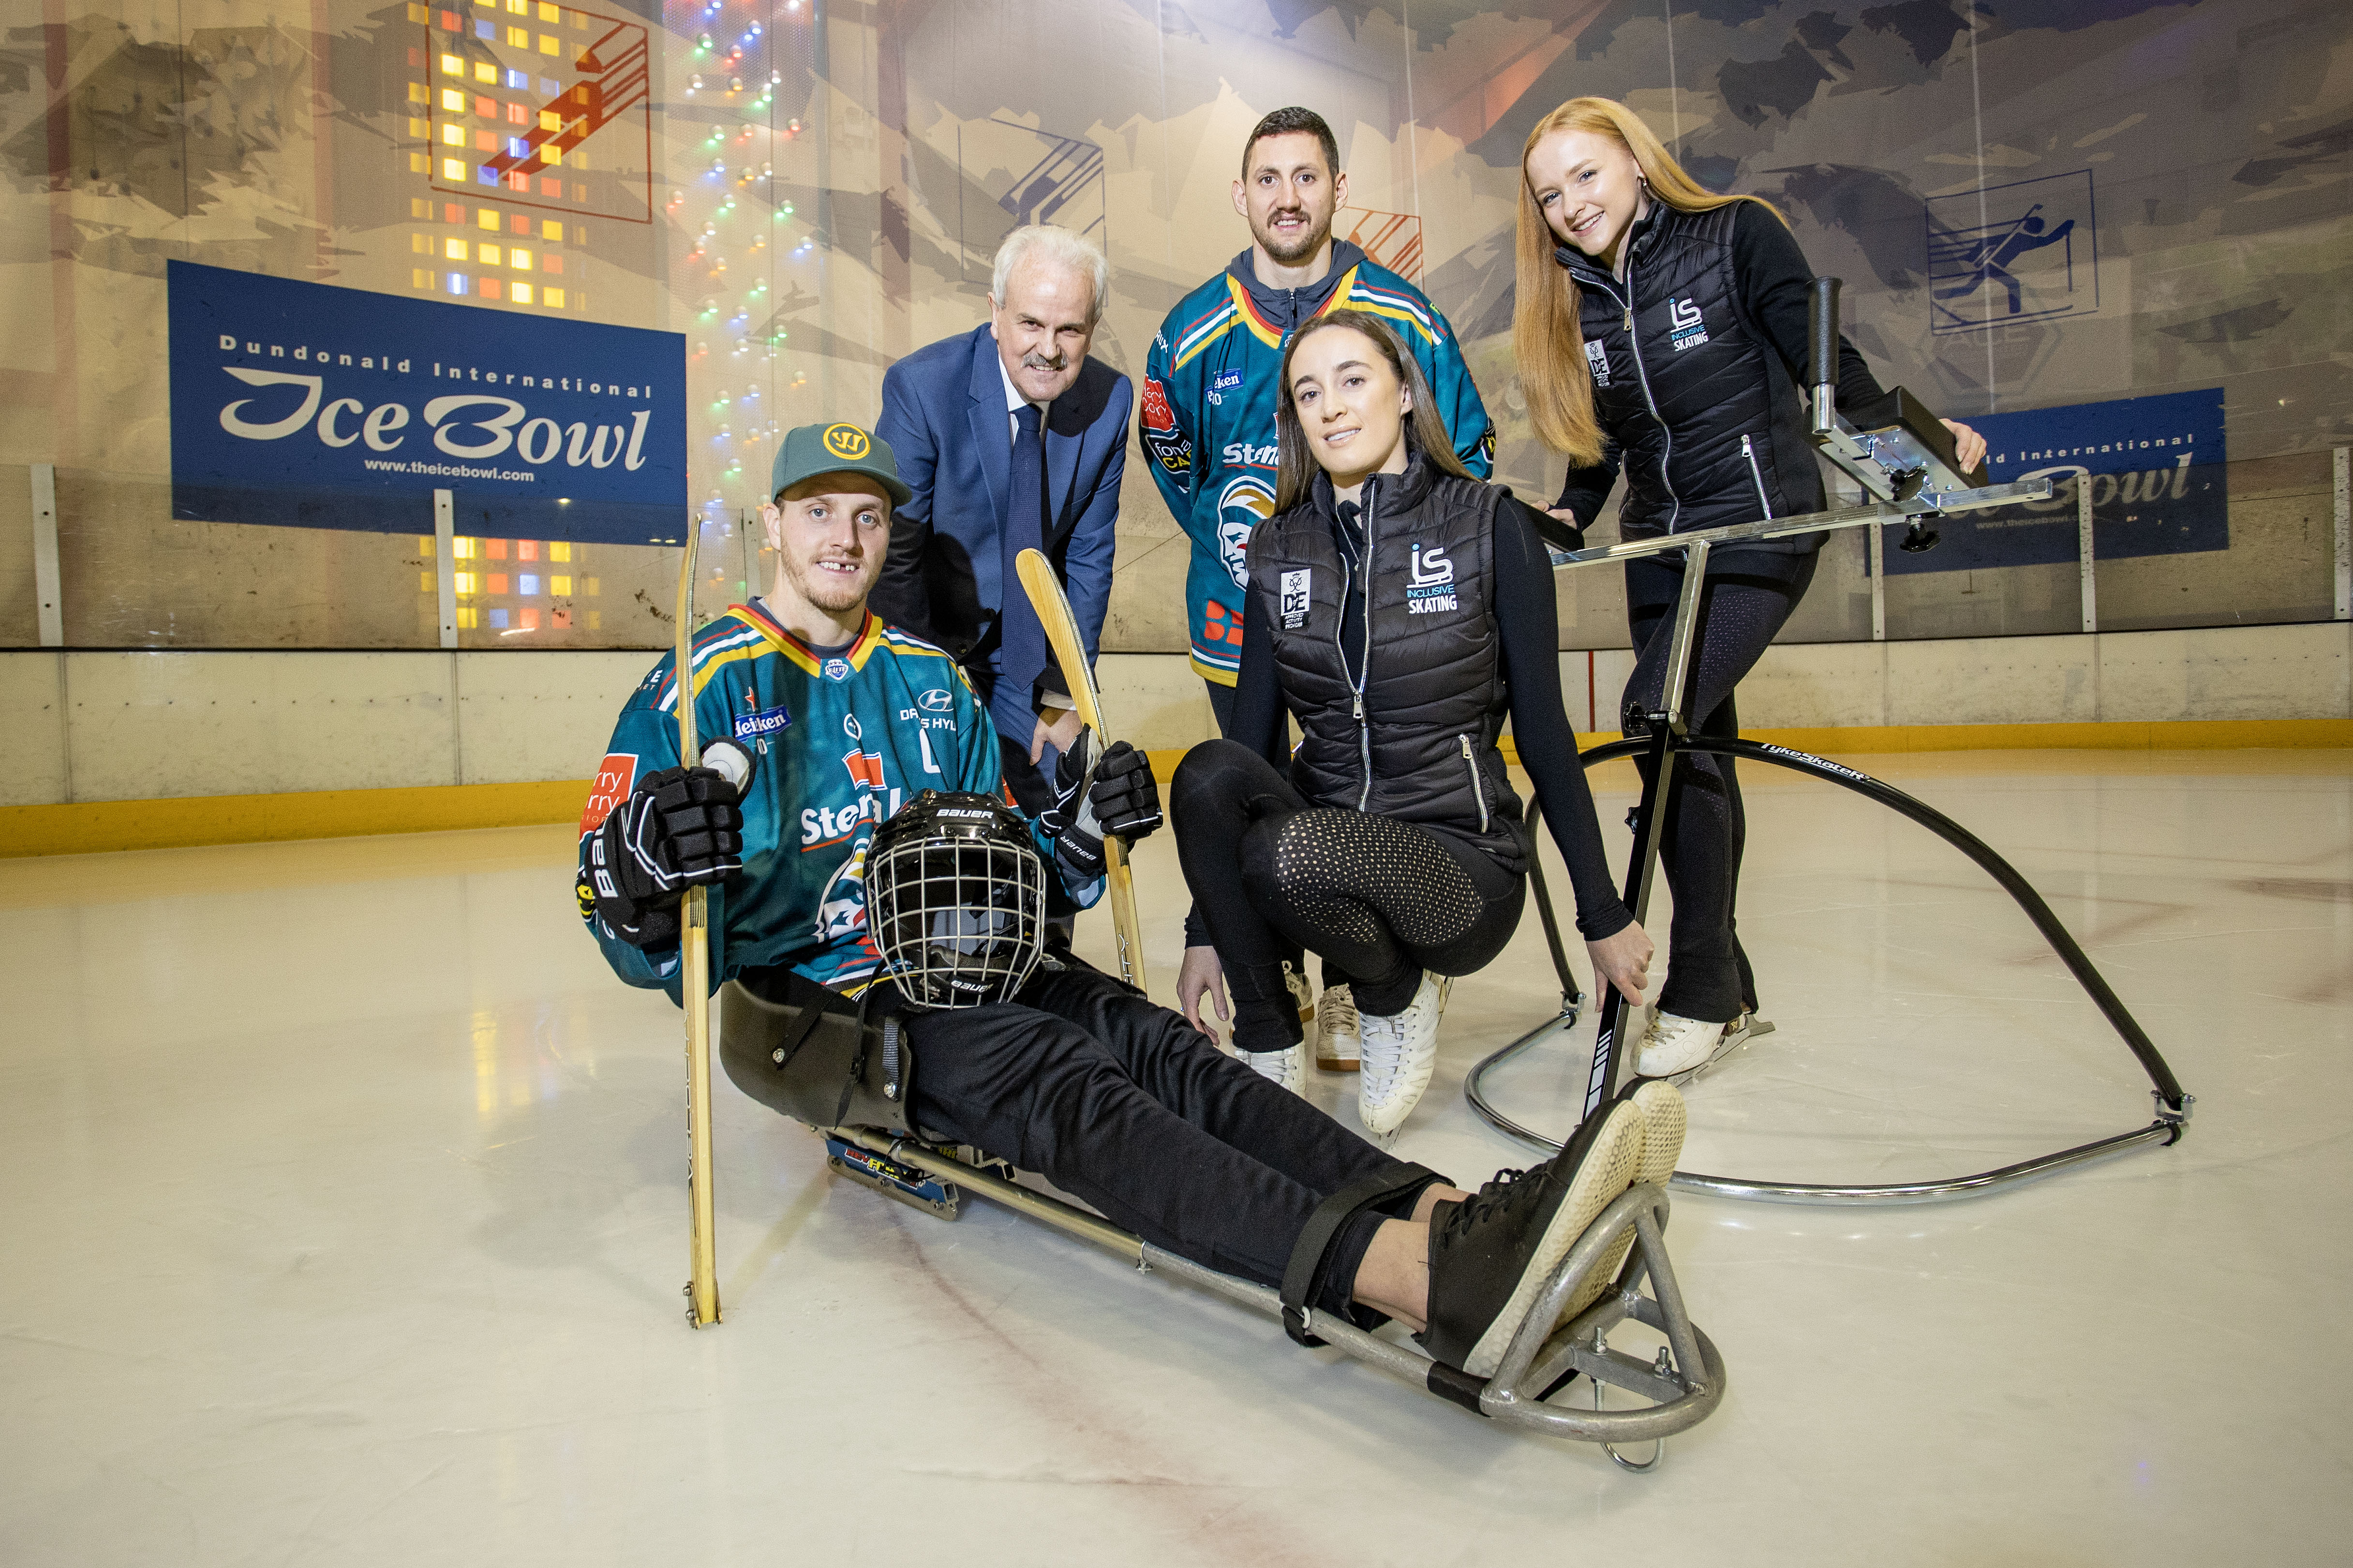 Disability Sledging and Inclusive Ice Skating Sessions 